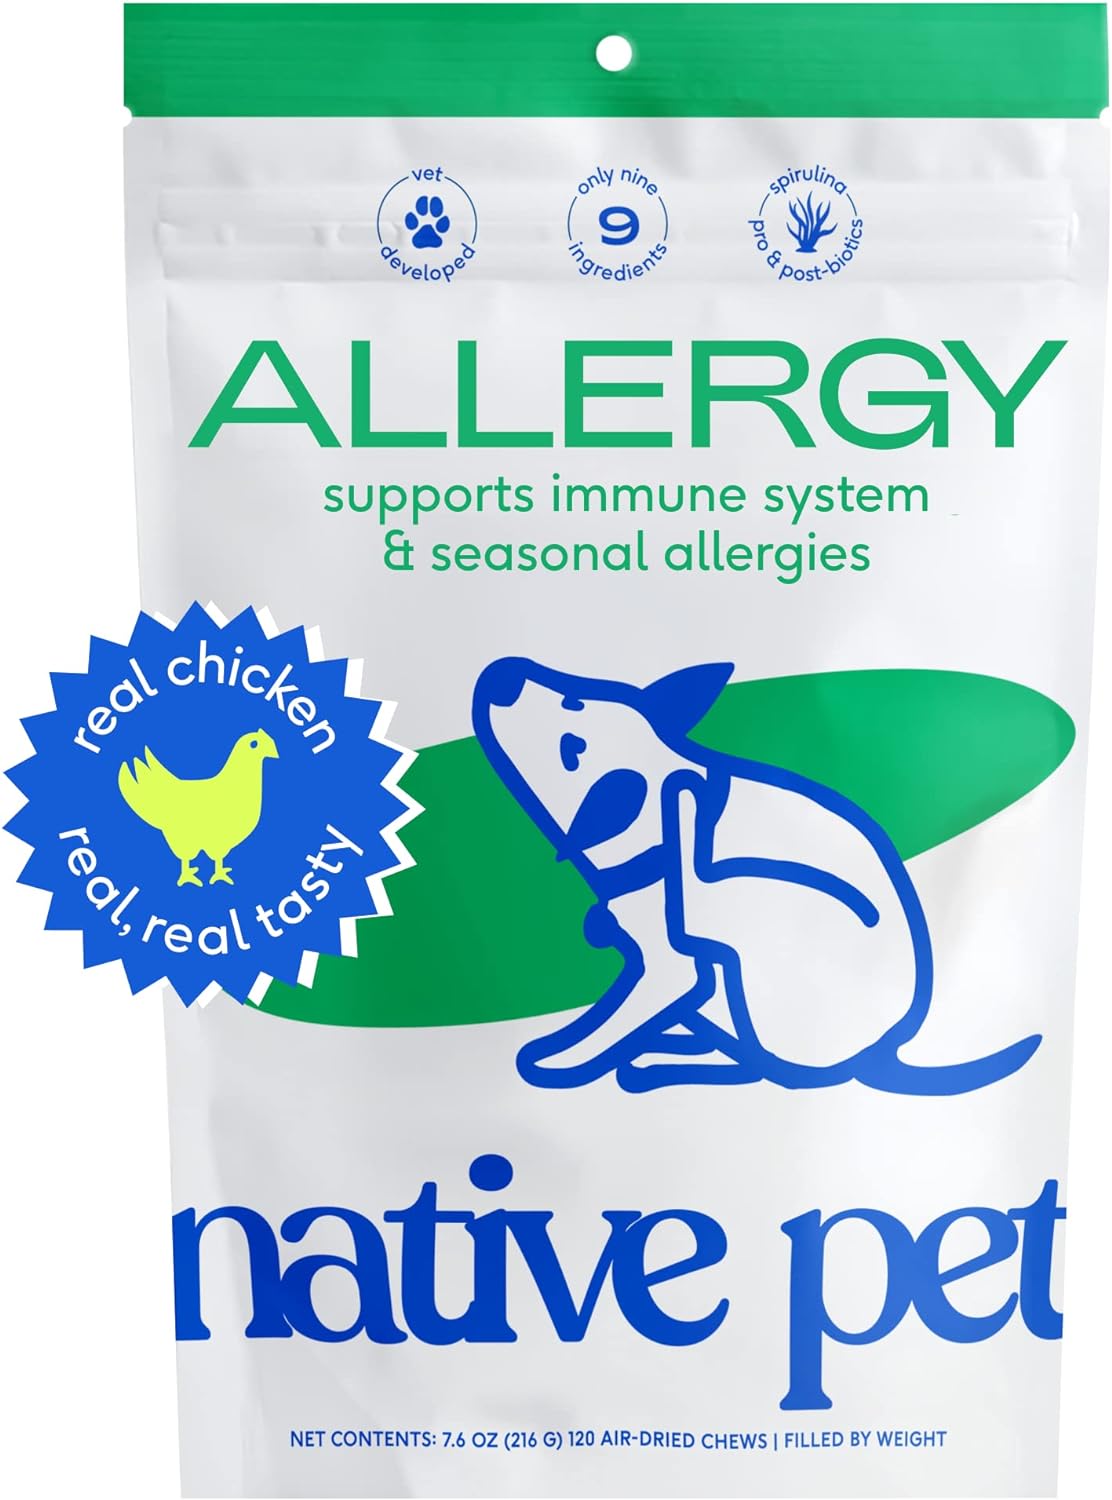 Native Pet Dog Allergy Chews – Natural Dog Skin Allergies Treatment – Anti Itch for Dogs Allergy Relief – Itch Relief & Allergy Support for Dogs – Dog Probiotics for Itchy Skin - 120 Chews